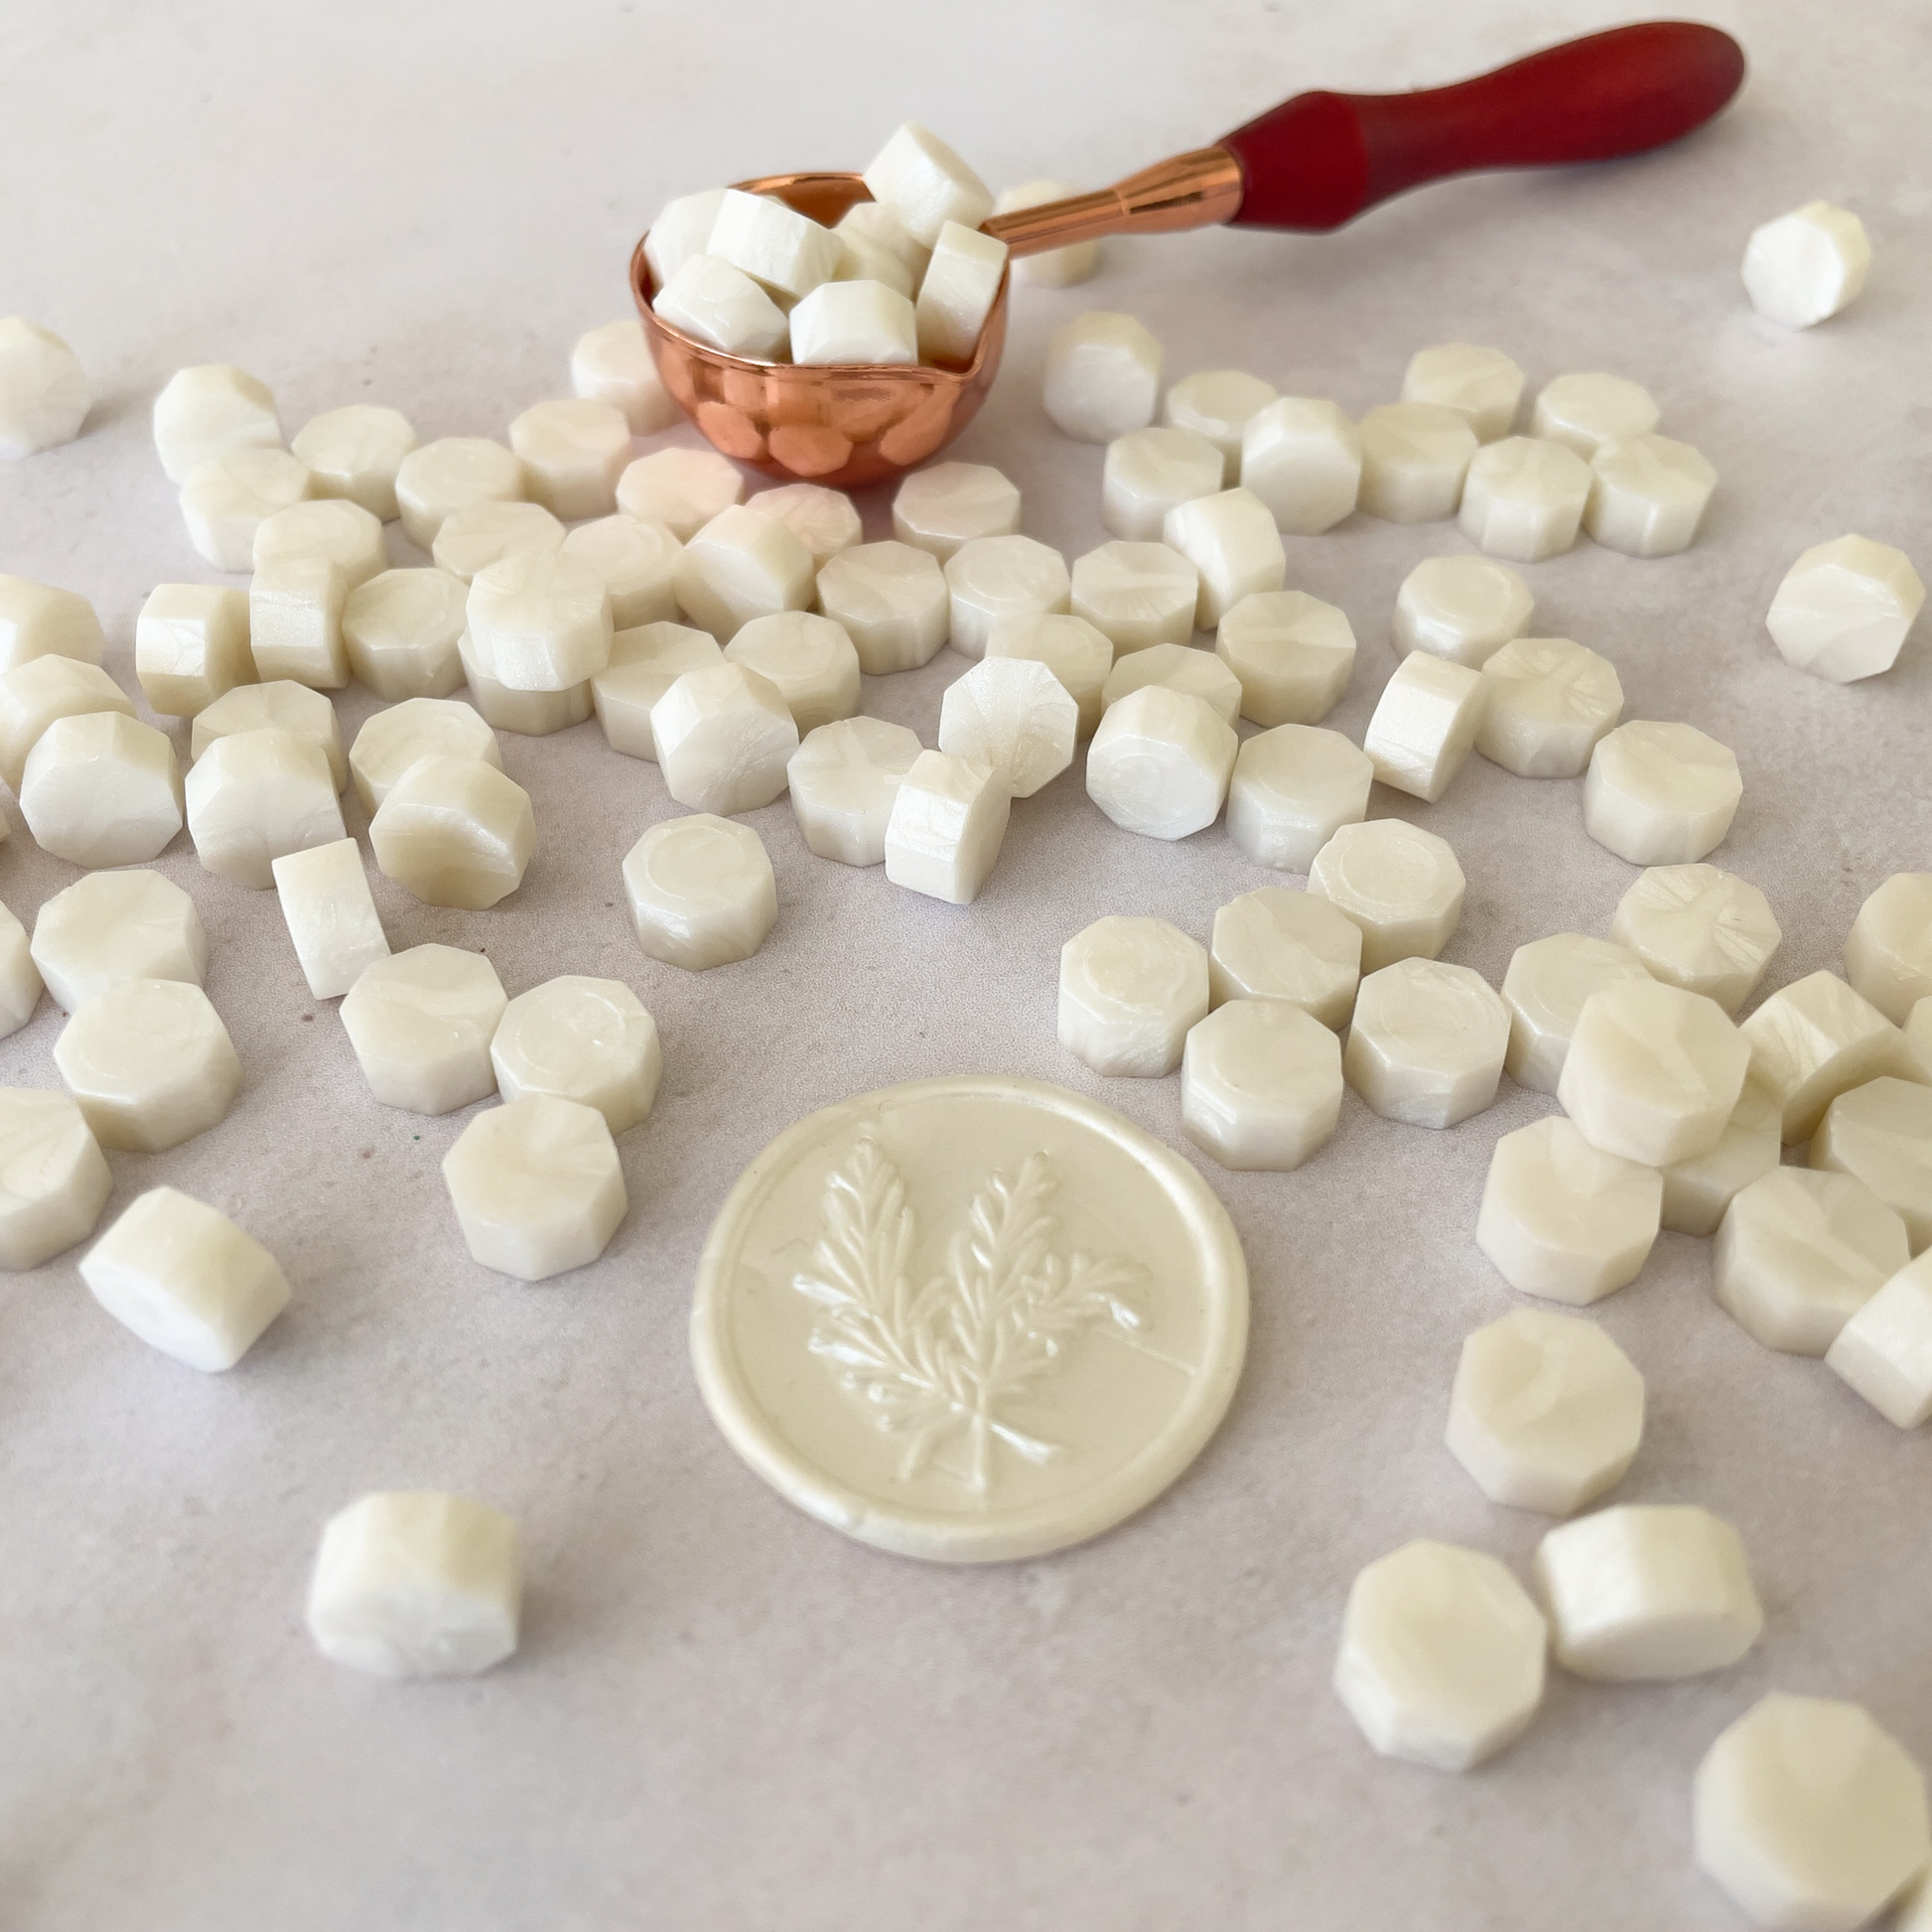 pearlised ivory sealing wax beads.  Small beads made from wax.  Melt in a melting spoon to make wax stamps and seals